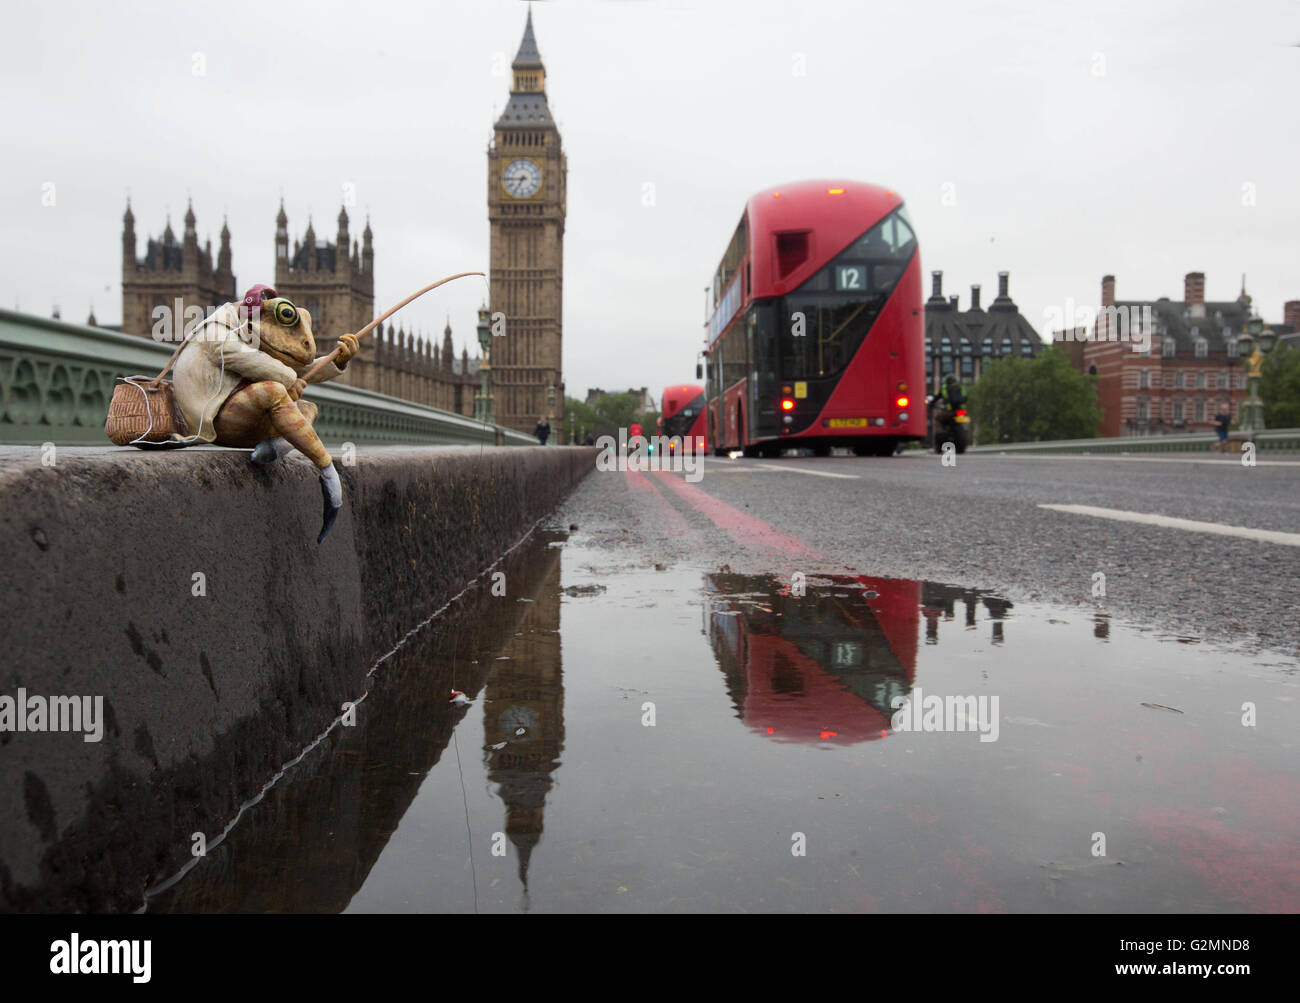 EDITORIAL USE ONLY A miniature sculpture of Beatrix Potter character Mr. Jeremy Fisher on Westminster Bridge in London, which has been updated for the 21st Century by street artist Marcus Crocker in celebration of the 150th anniversary of the author's birth. Stock Photo